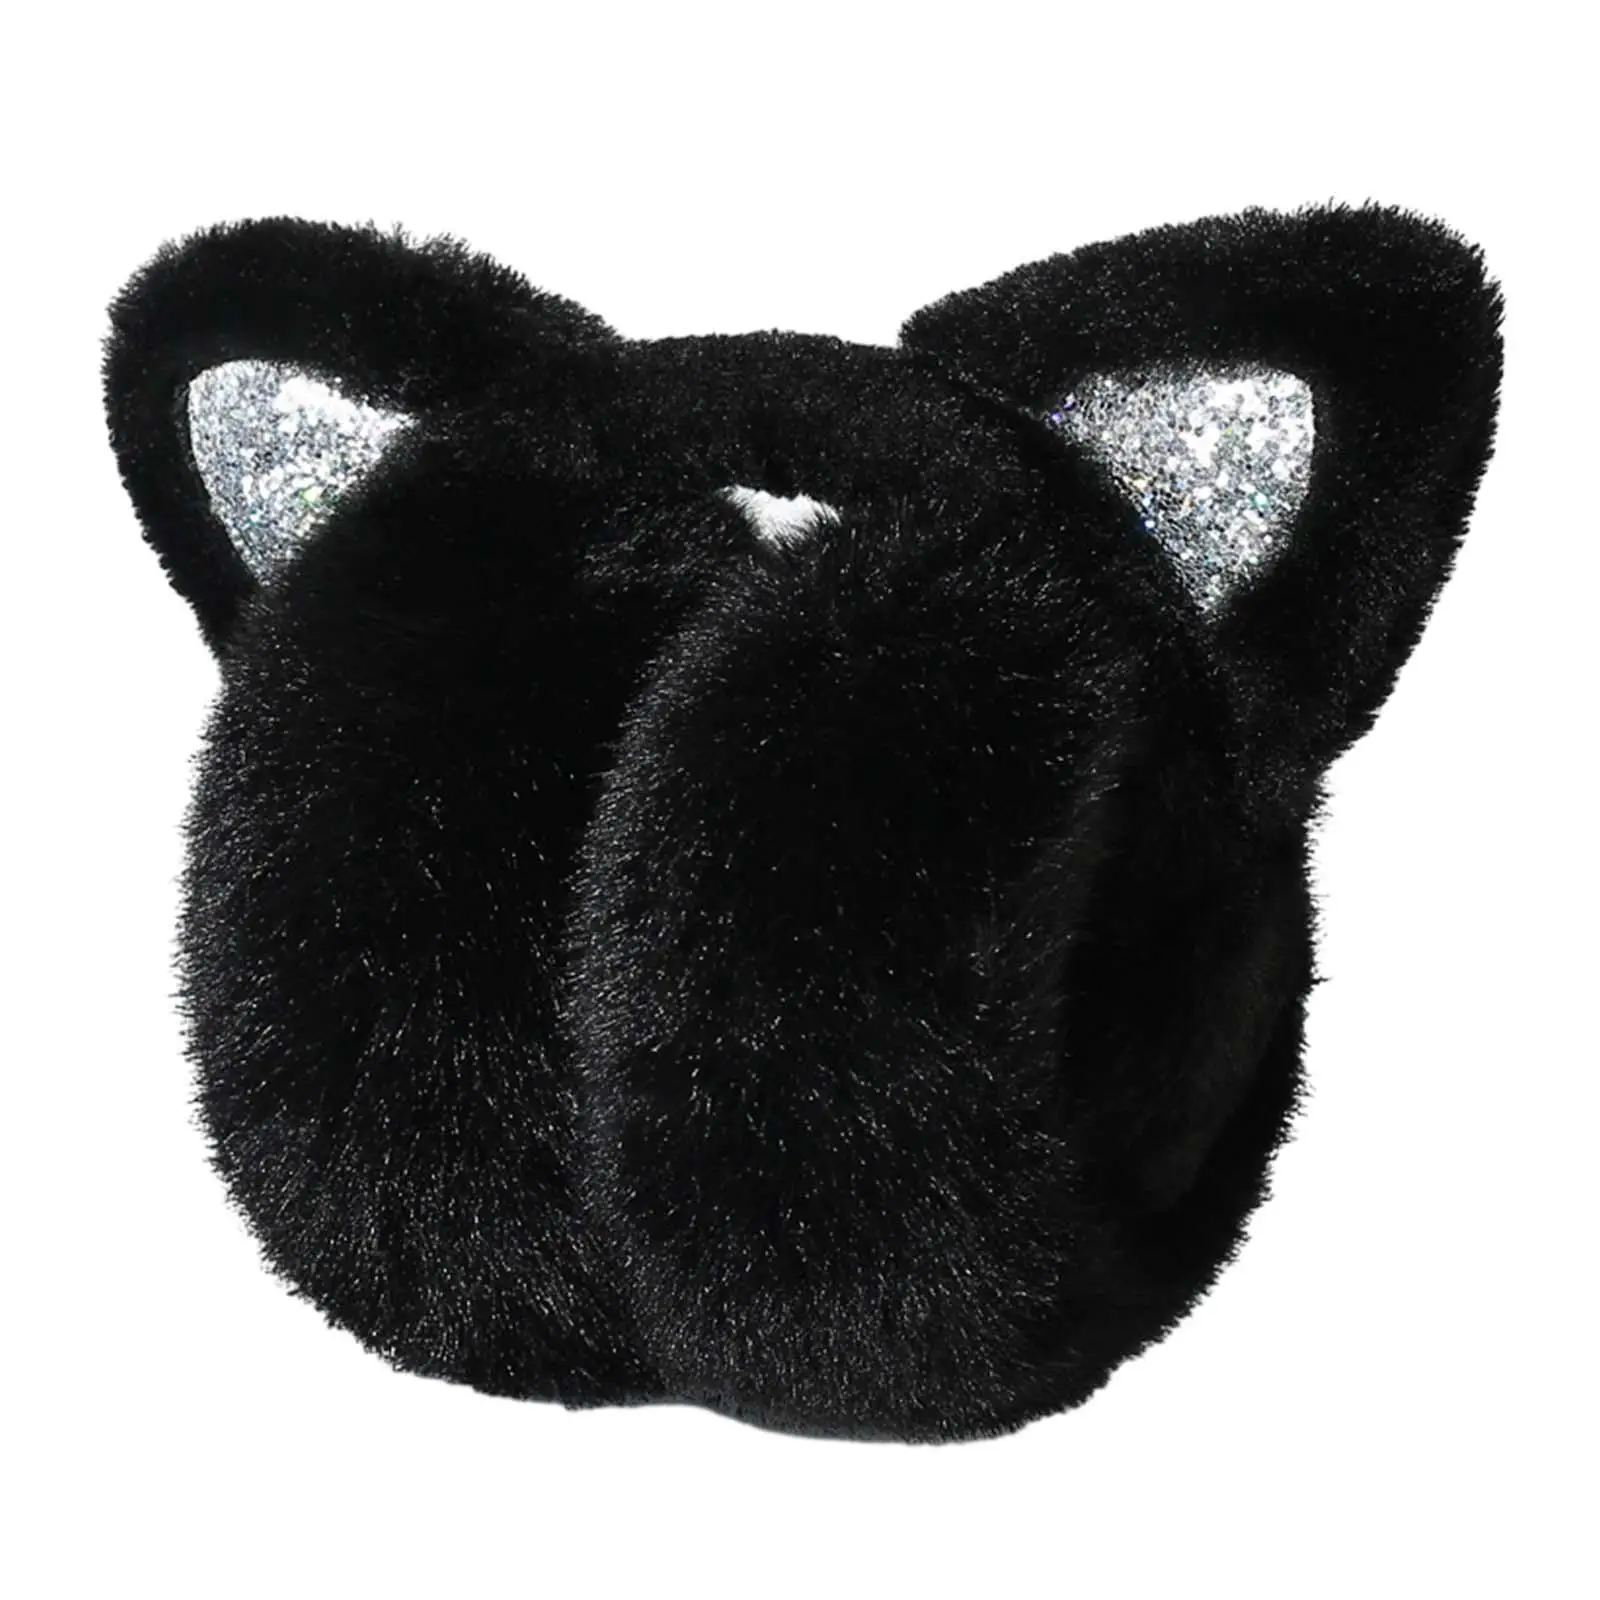 Winter Ear Muffs Soft Warm Foldable Women Polyester Ear Warmers Earmuffs for Skating Traveling Outdoor Activities Skiing Riding